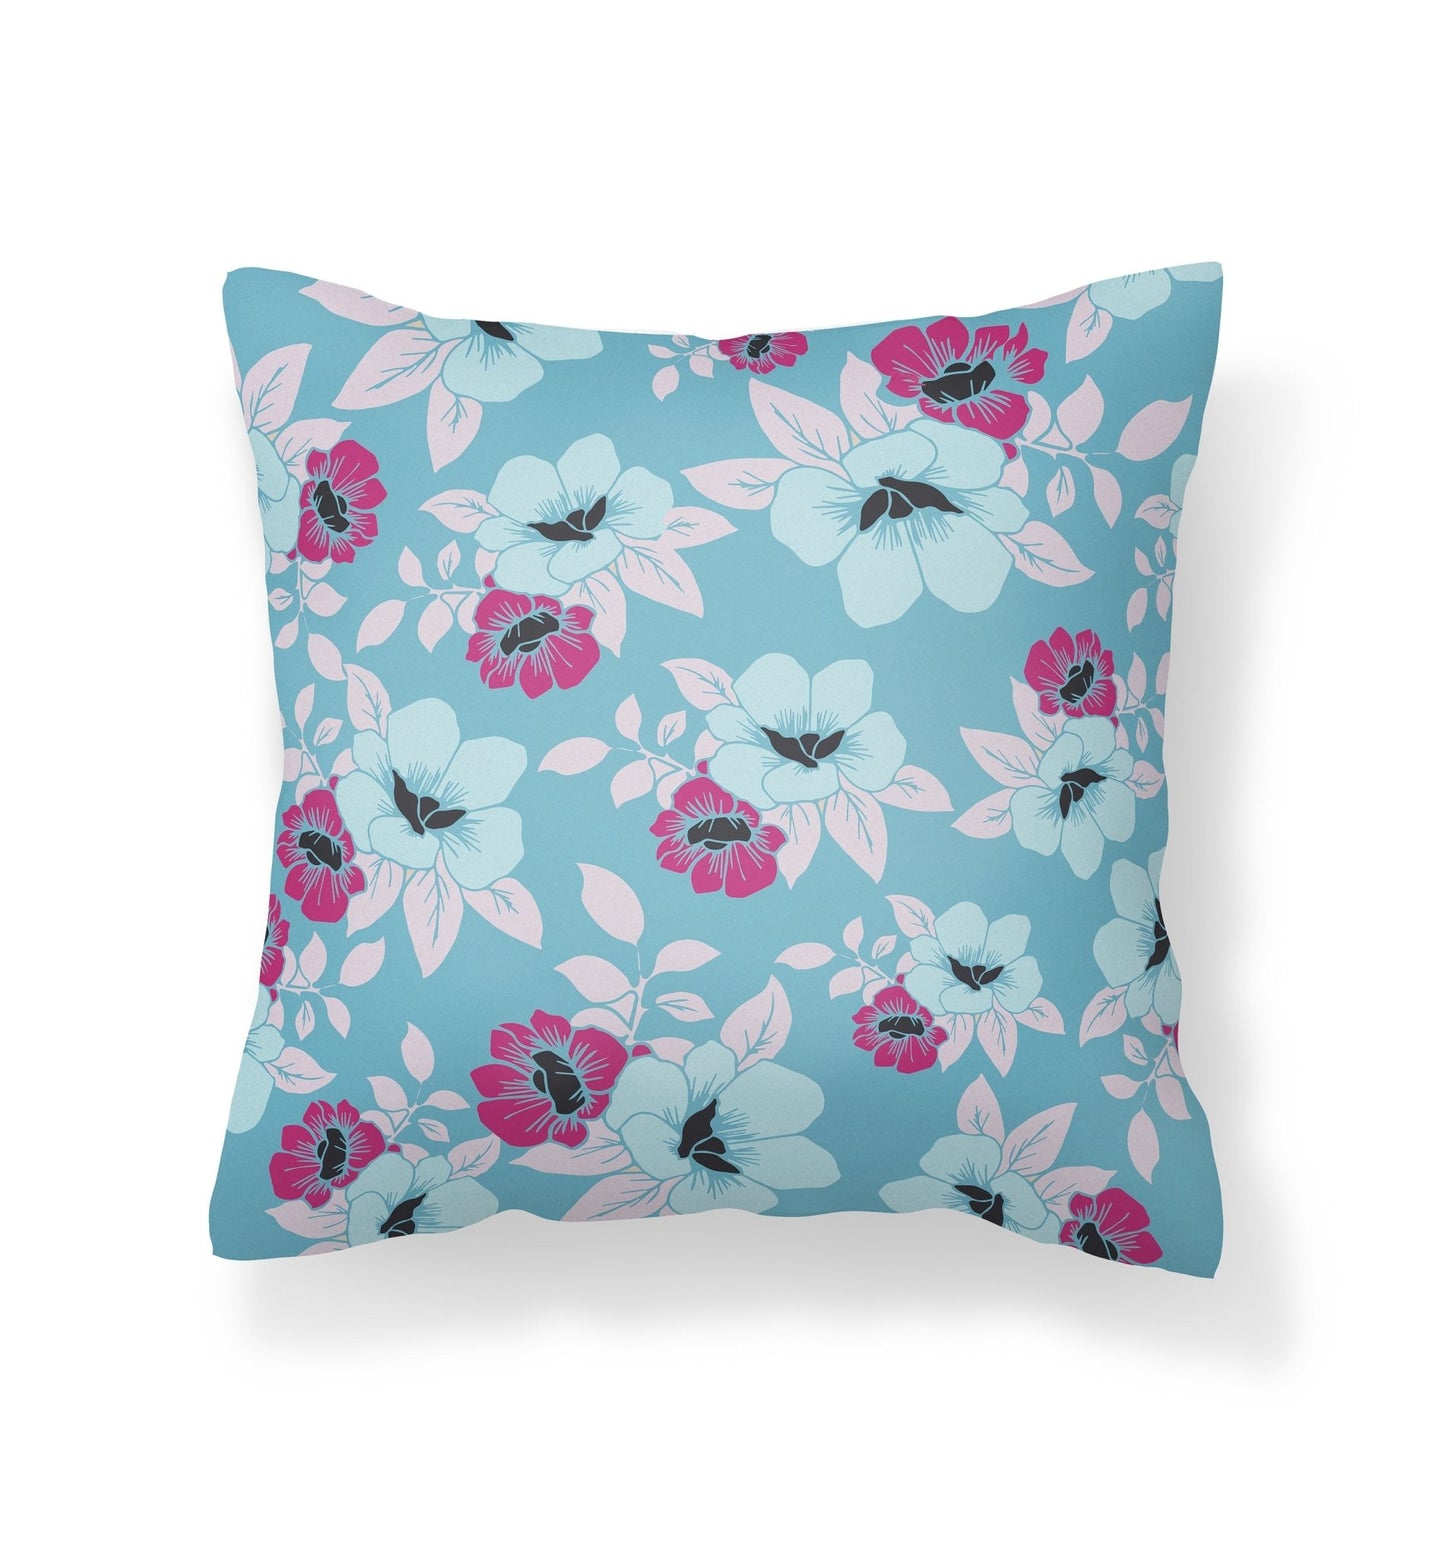 Floral Outdoor Pillow - Blue and Pink - Throw Pillows